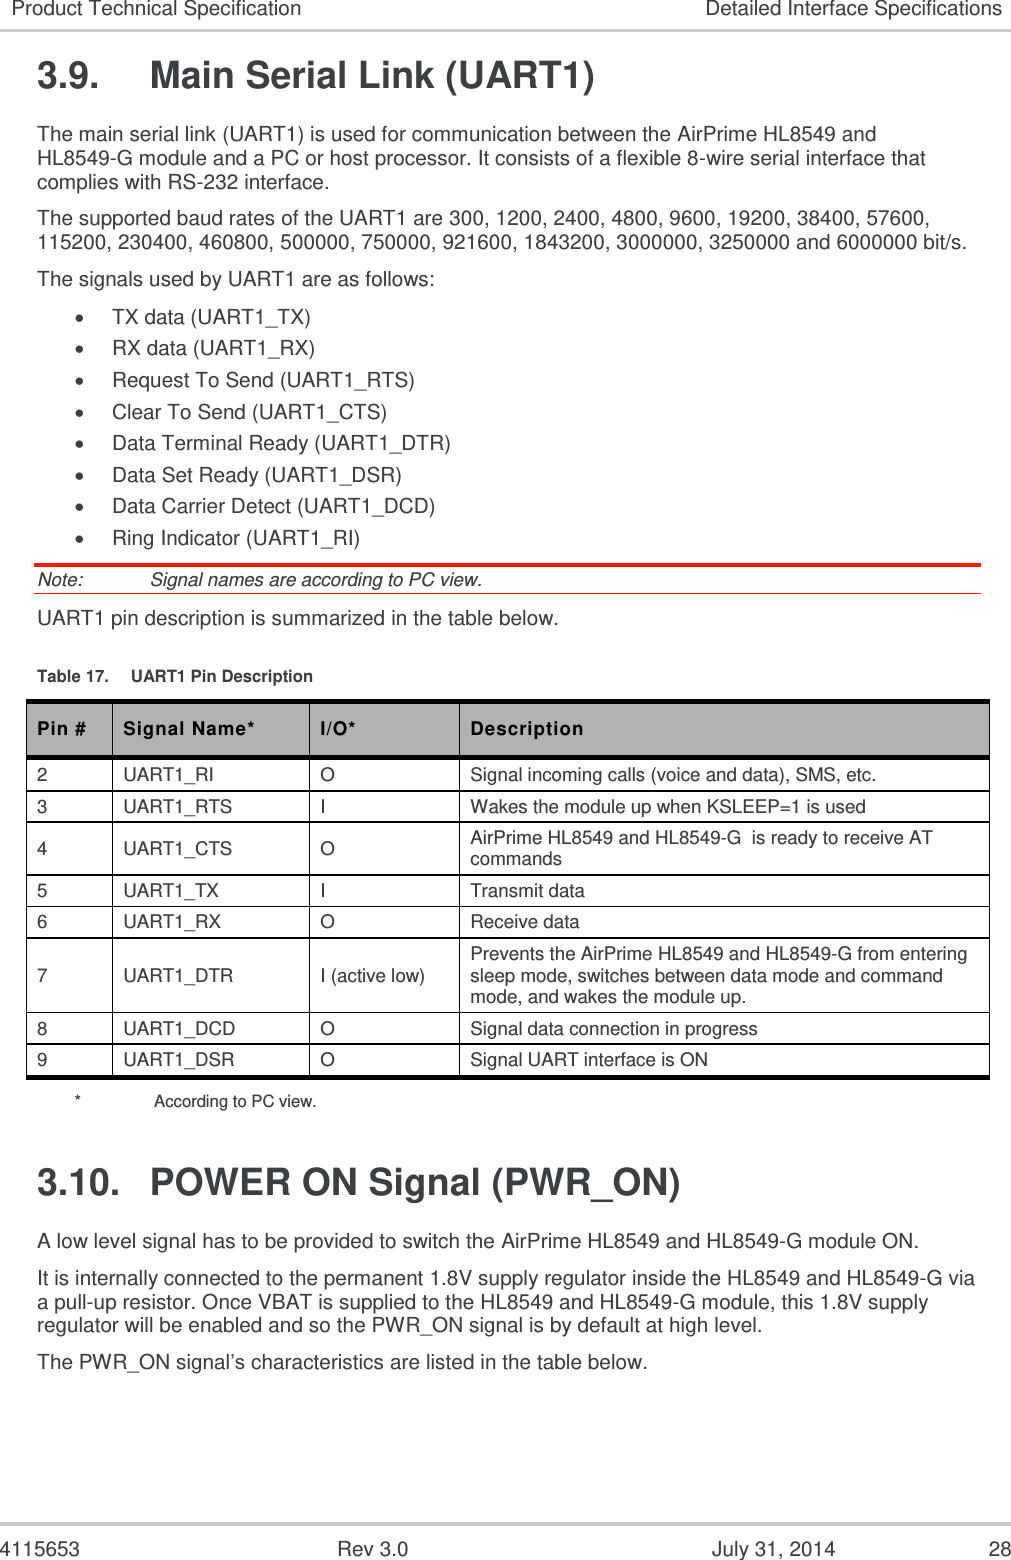  4115653  Rev 3.0  July 31, 2014  28 Product Technical Specification Detailed Interface Specifications 3.9.  Main Serial Link (UART1) The main serial link (UART1) is used for communication between the AirPrime HL8549 and HL8549-G module and a PC or host processor. It consists of a flexible 8-wire serial interface that complies with RS-232 interface. The supported baud rates of the UART1 are 300, 1200, 2400, 4800, 9600, 19200, 38400, 57600, 115200, 230400, 460800, 500000, 750000, 921600, 1843200, 3000000, 3250000 and 6000000 bit/s. The signals used by UART1 are as follows:  TX data (UART1_TX)  RX data (UART1_RX)  Request To Send (UART1_RTS)  Clear To Send (UART1_CTS)  Data Terminal Ready (UART1_DTR)  Data Set Ready (UART1_DSR)  Data Carrier Detect (UART1_DCD)  Ring Indicator (UART1_RI) Note:   Signal names are according to PC view. UART1 pin description is summarized in the table below. Table 17.  UART1 Pin Description Pin # Signal Name* I/O* Description 2 UART1_RI O Signal incoming calls (voice and data), SMS, etc. 3 UART1_RTS I Wakes the module up when KSLEEP=1 is used 4 UART1_CTS O AirPrime HL8549 and HL8549-G  is ready to receive AT commands 5 UART1_TX I Transmit data 6 UART1_RX O Receive data 7 UART1_DTR I (active low) Prevents the AirPrime HL8549 and HL8549-G from entering sleep mode, switches between data mode and command mode, and wakes the module up. 8 UART1_DCD O Signal data connection in progress 9 UART1_DSR O Signal UART interface is ON *    According to PC view. 3.10.  POWER ON Signal (PWR_ON) A low level signal has to be provided to switch the AirPrime HL8549 and HL8549-G module ON. It is internally connected to the permanent 1.8V supply regulator inside the HL8549 and HL8549-G via a pull-up resistor. Once VBAT is supplied to the HL8549 and HL8549-G module, this 1.8V supply regulator will be enabled and so the PWR_ON signal is by default at high level. The PWR_ON signal’s characteristics are listed in the table below. 